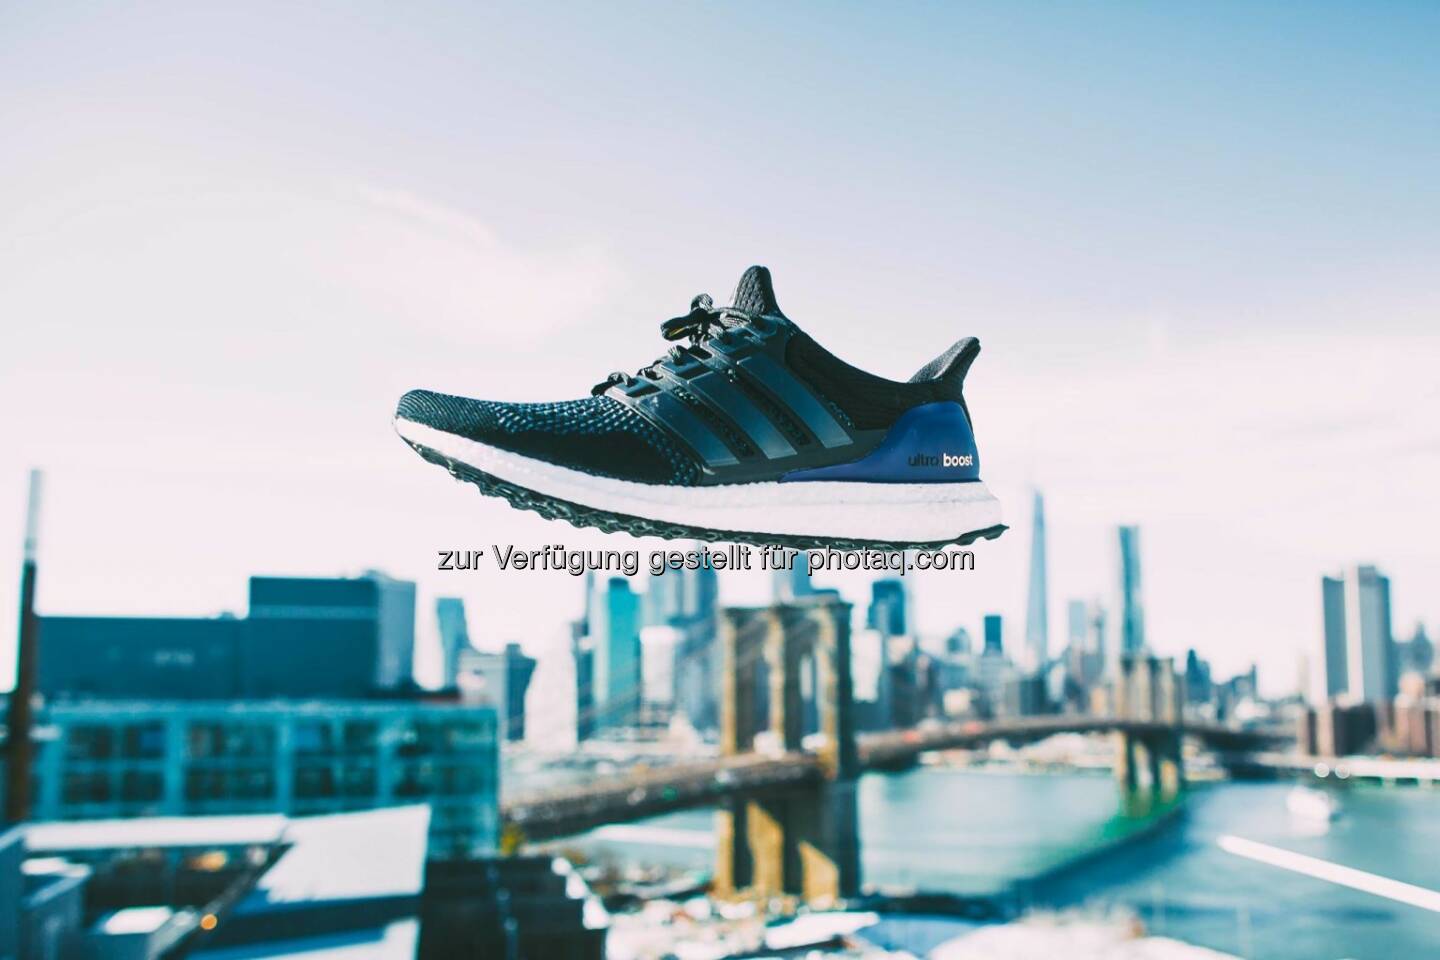 Welcome to NBA All-Star 2015 in NYC. adidas is taking over the city to bring you the best of the brand and NYC through the lens of the city's most creative eyes. Stay tuned here and follow adidas Basketball and adidas Originals for more. #UltraBoost  Source: http://facebook.com/adidas